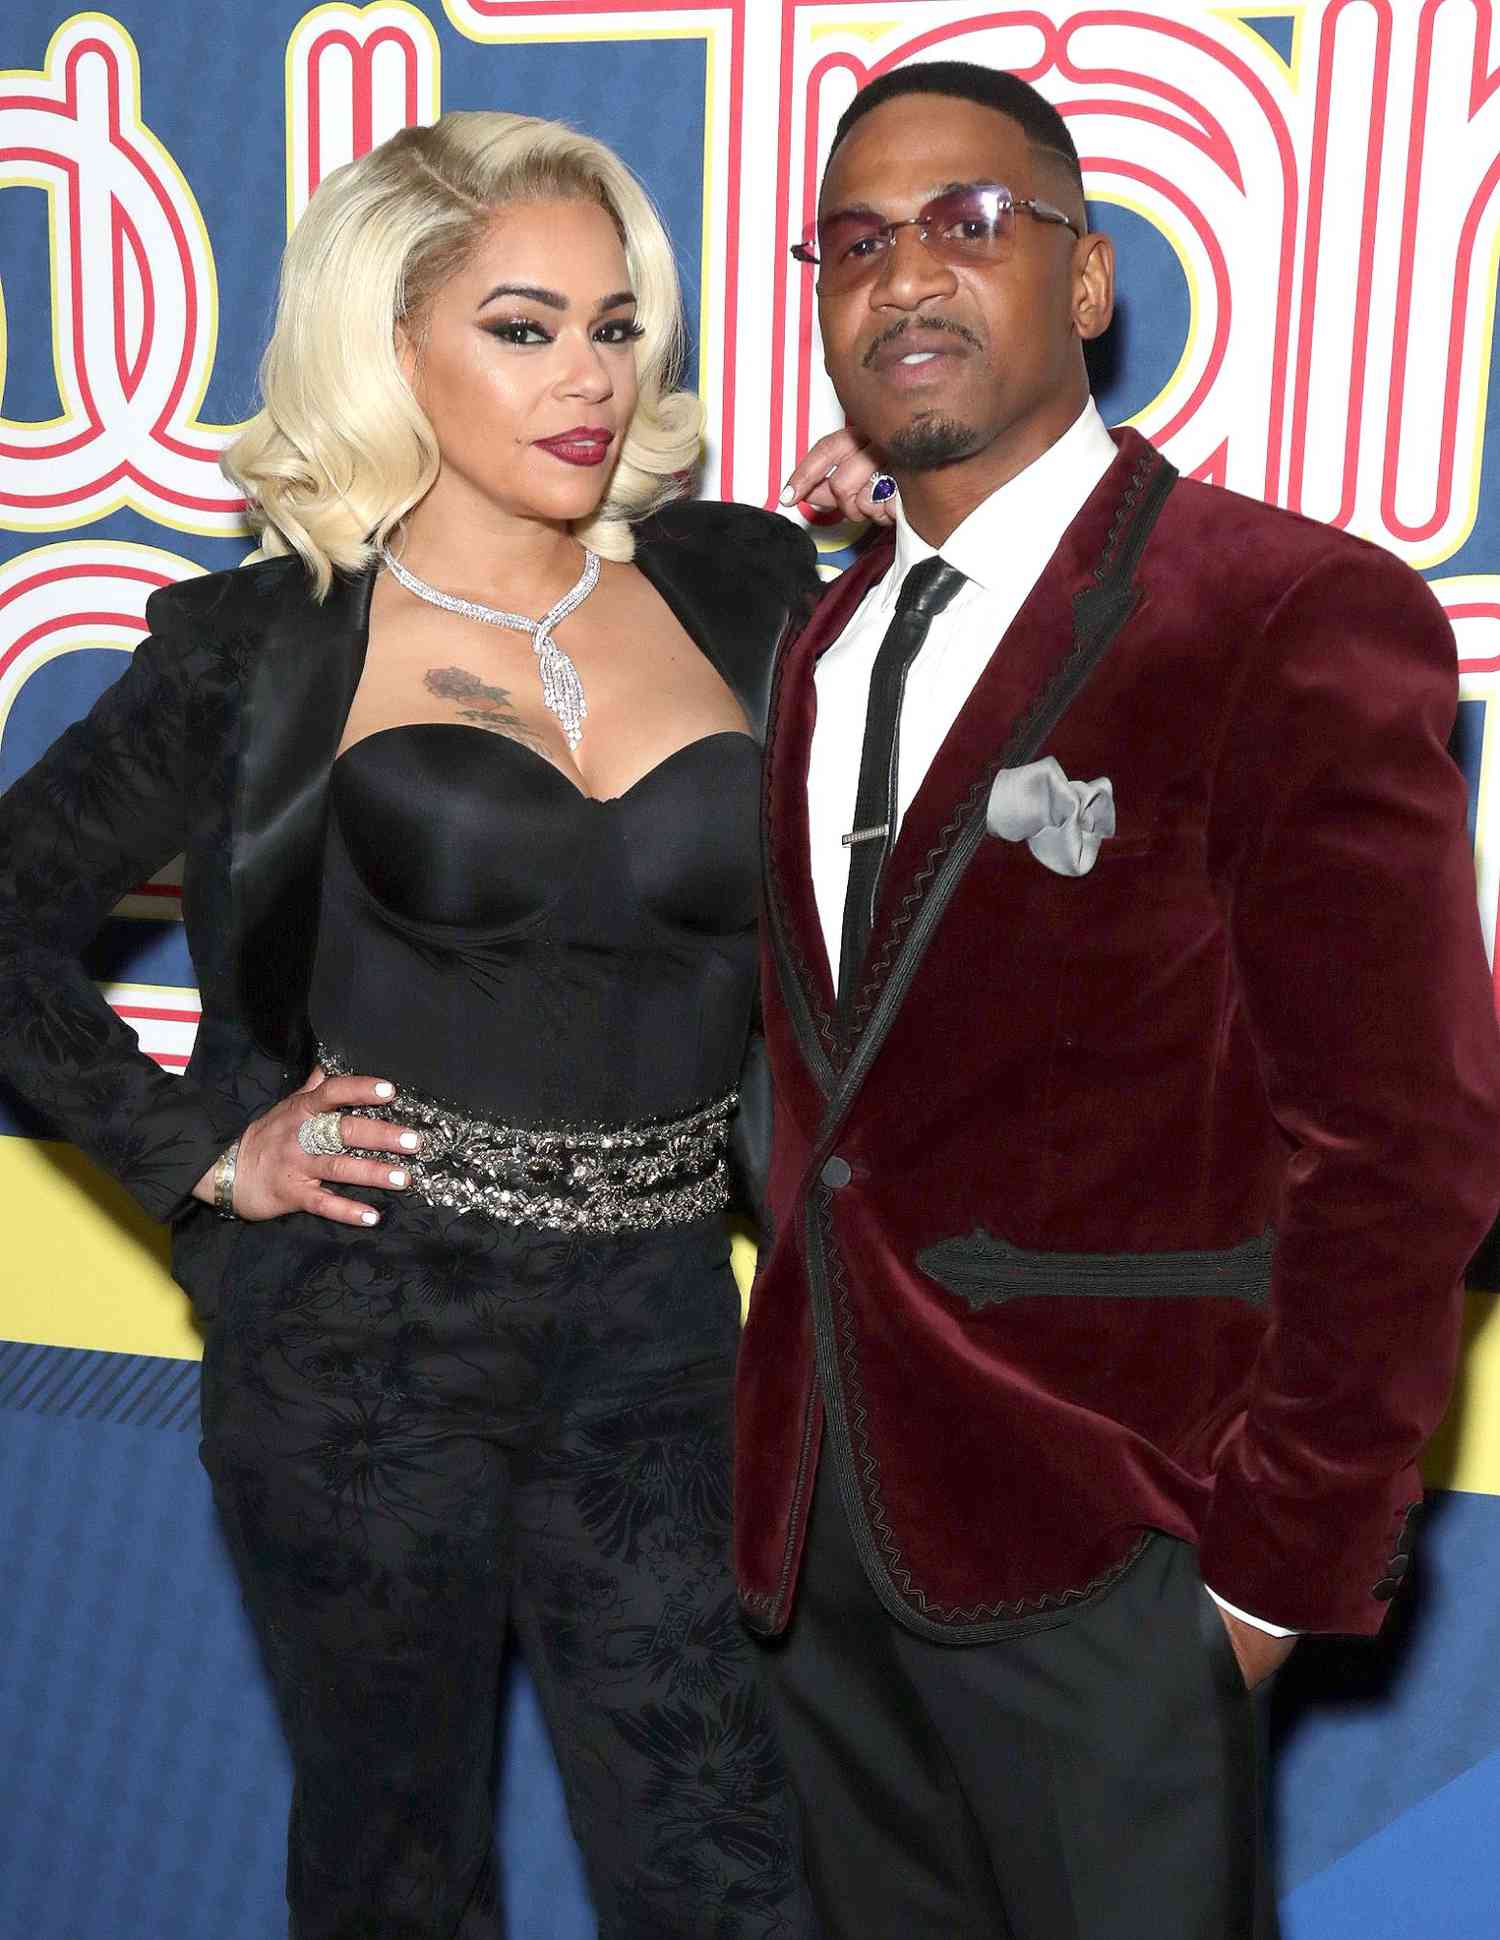 LAS VEGAS, NV - NOVEMBER 17: Faith Evans (L) and her husband Stevie J attend the 2018 Soul Train Awards, presented by BET, at the Orleans Arena on November 17, 2018